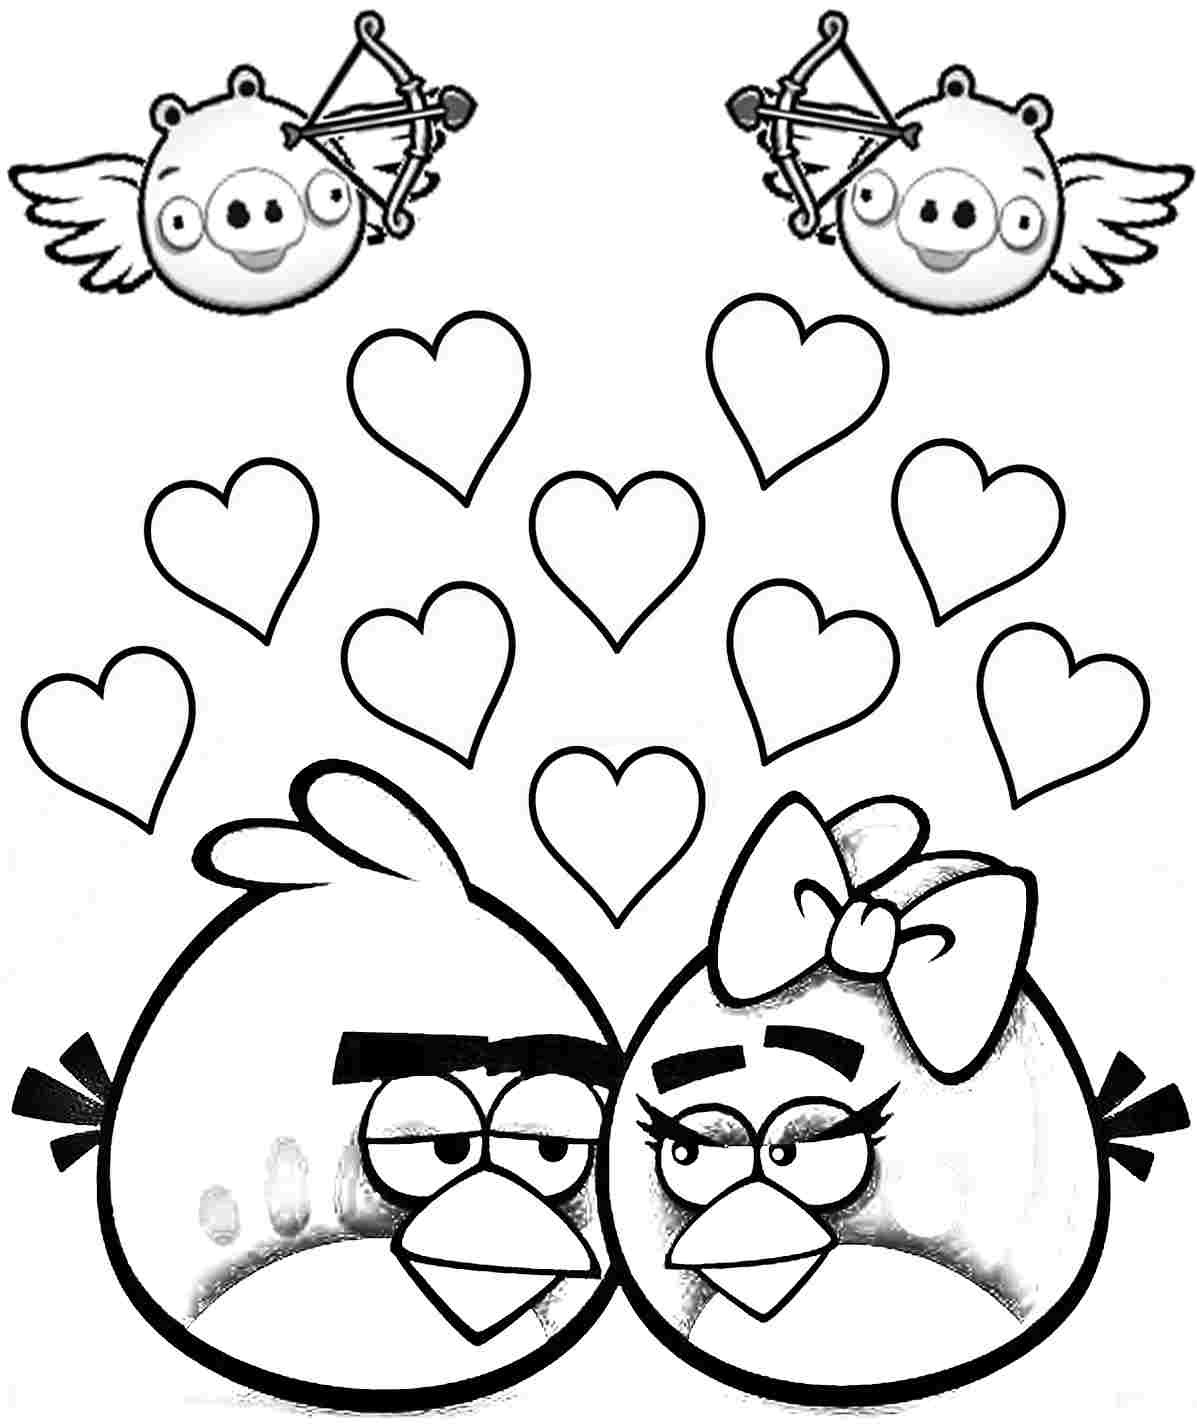 Valentine Coloring Sheets For Boys
 Valentines Day Coloring Pages For Boys at GetColorings